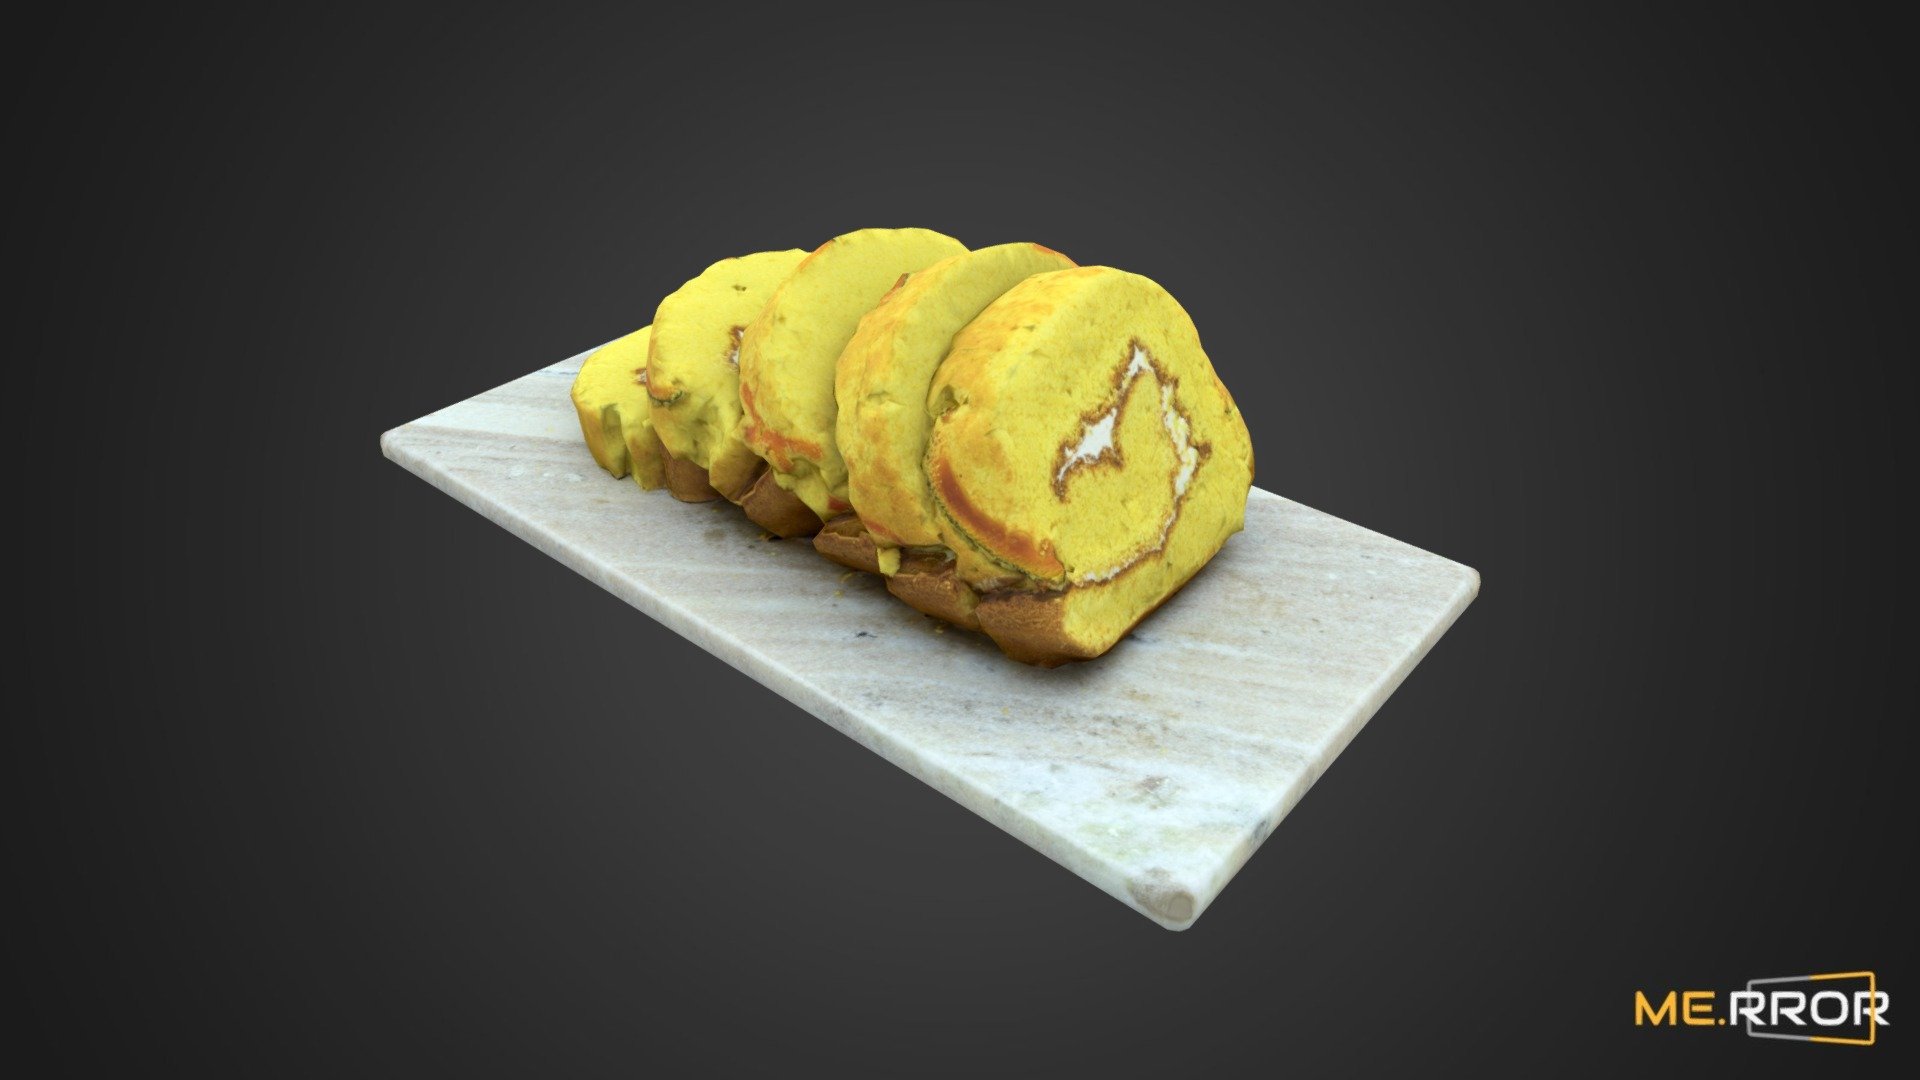 MERROR is a 3D Content PLATFORM which introduces various Asian assets to the 3D world


3DScanning #Photogrametry #ME.RROR - [Game-Ready] Slice Sweet Pumpkin Roll Cake - Buy Royalty Free 3D model by ME.RROR Studio (@merror) 3d model